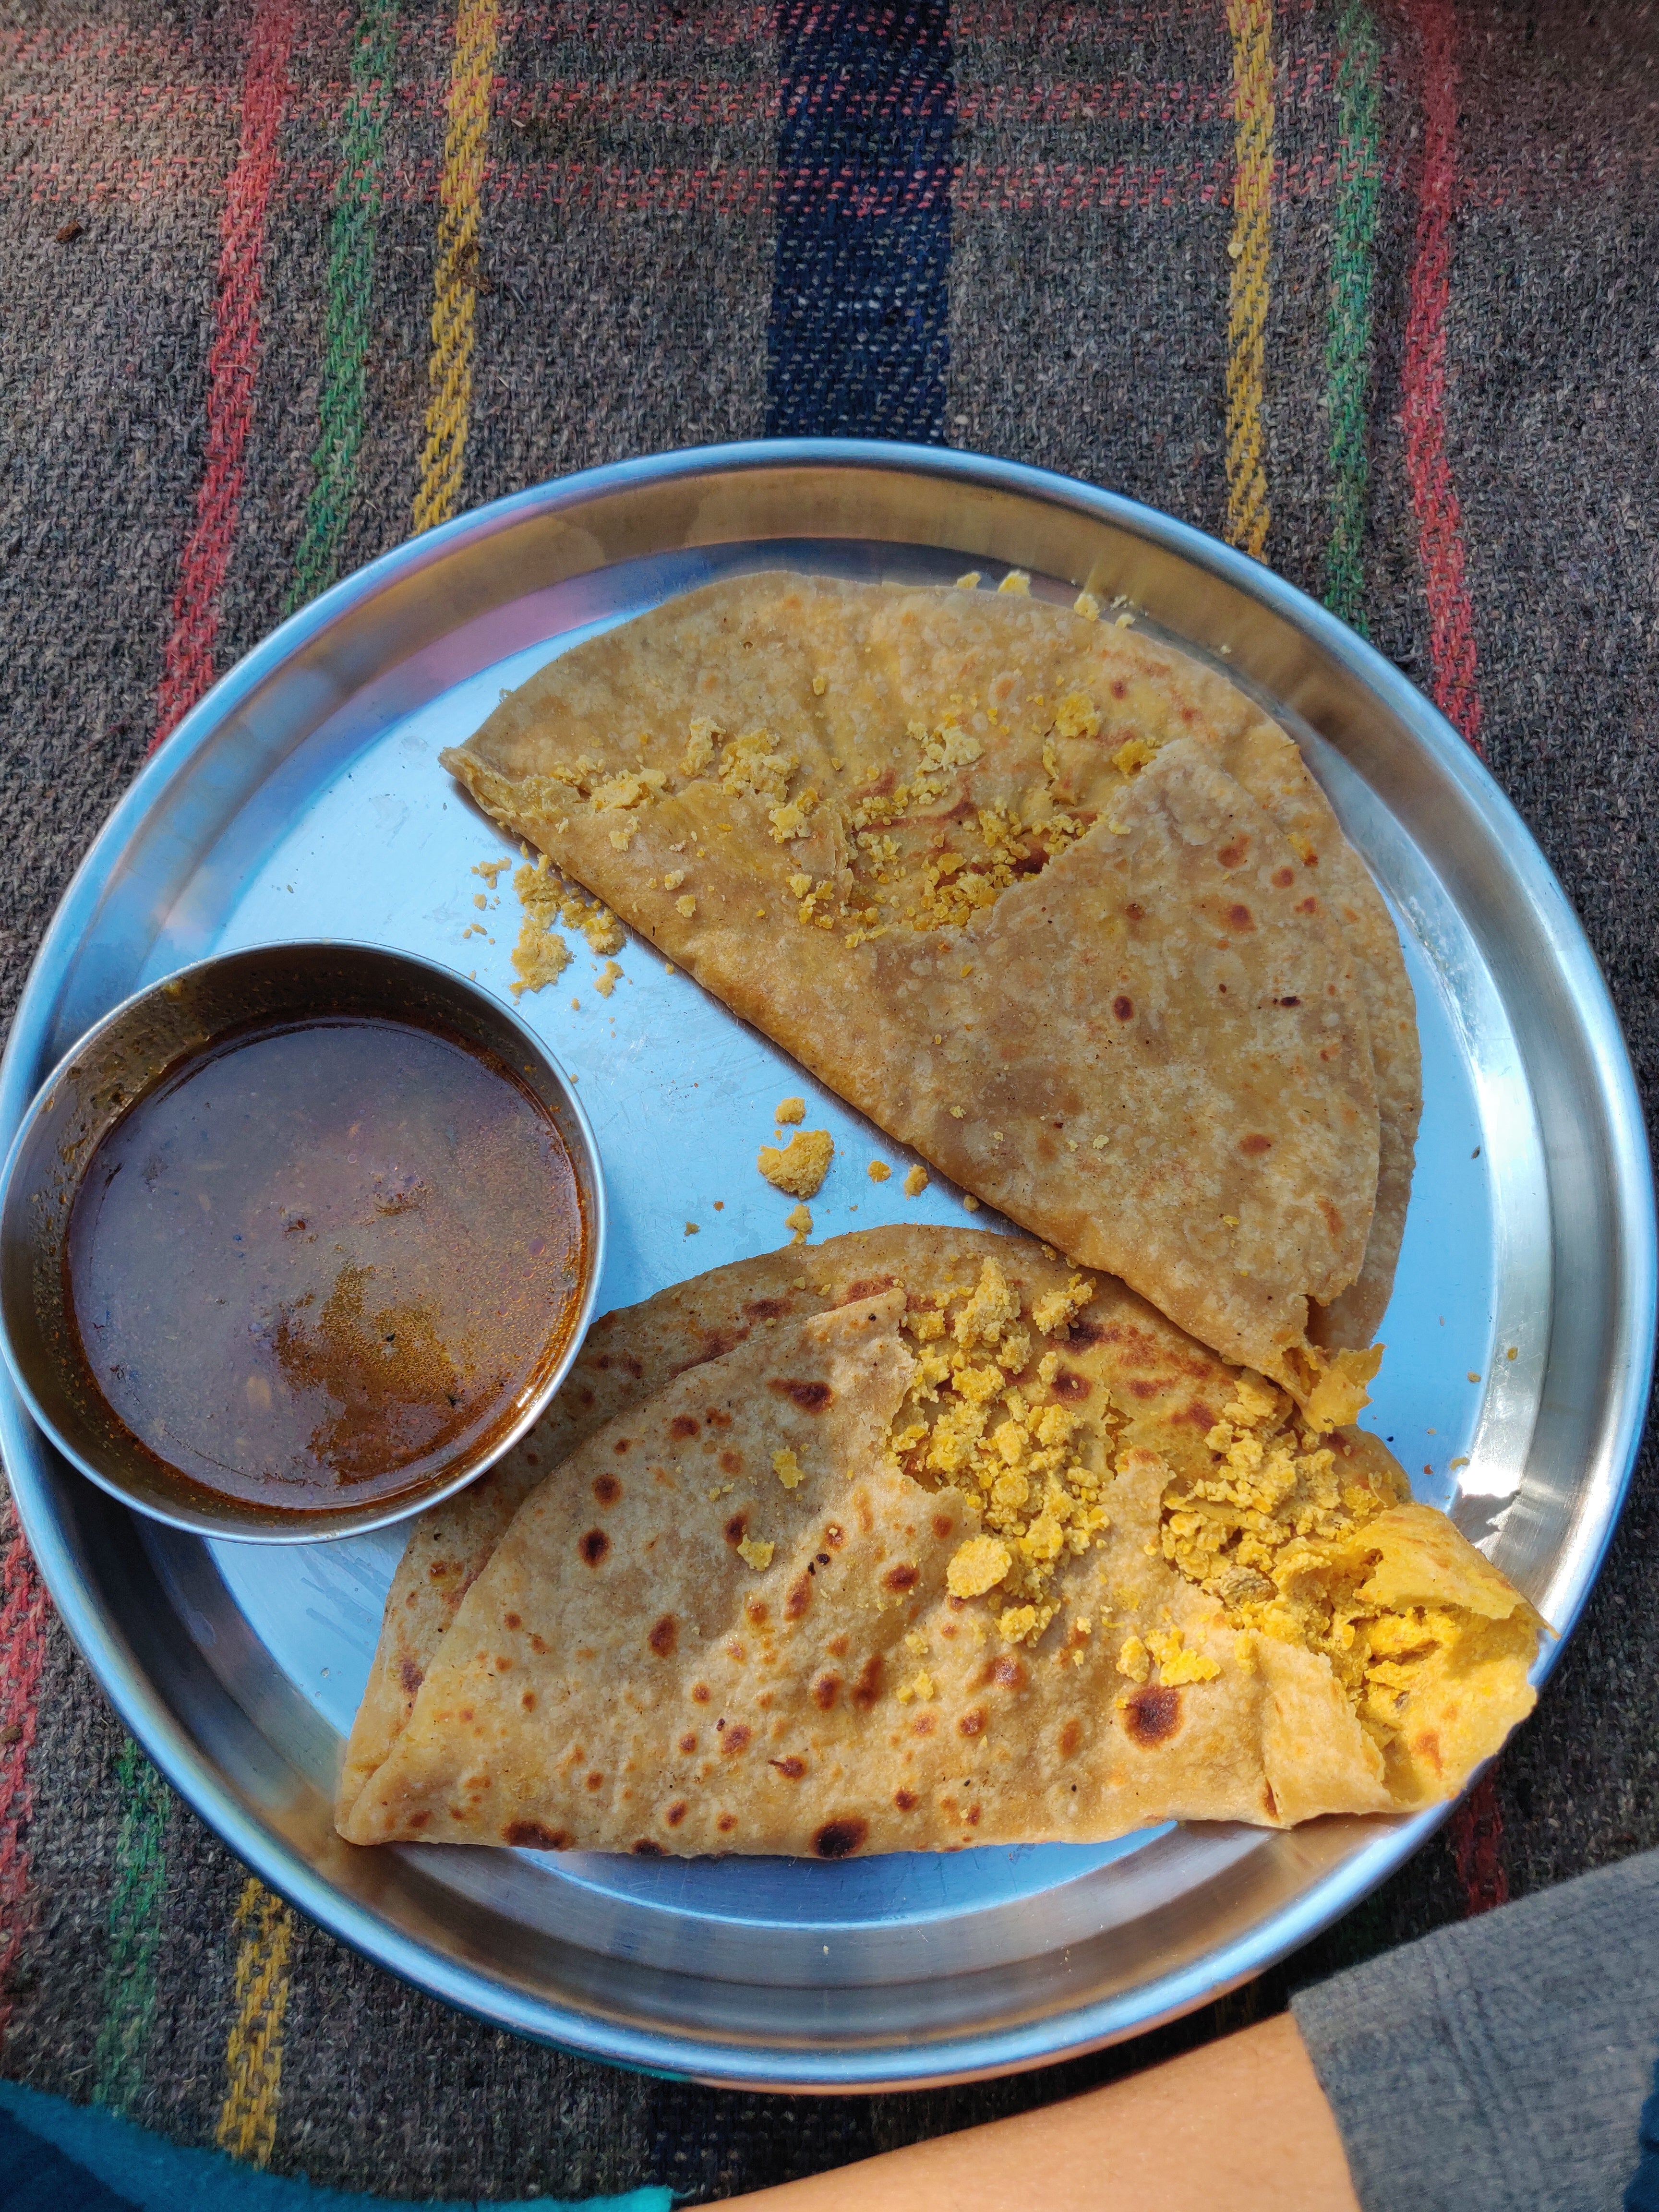 Special series, safarnama seriesm Indian dishes, solo travel, travel blogger, love for indian culture, Best sweet, healthy sweet, home made sweet, puran poli, how to make puran poli, happy sweet, eat healthy